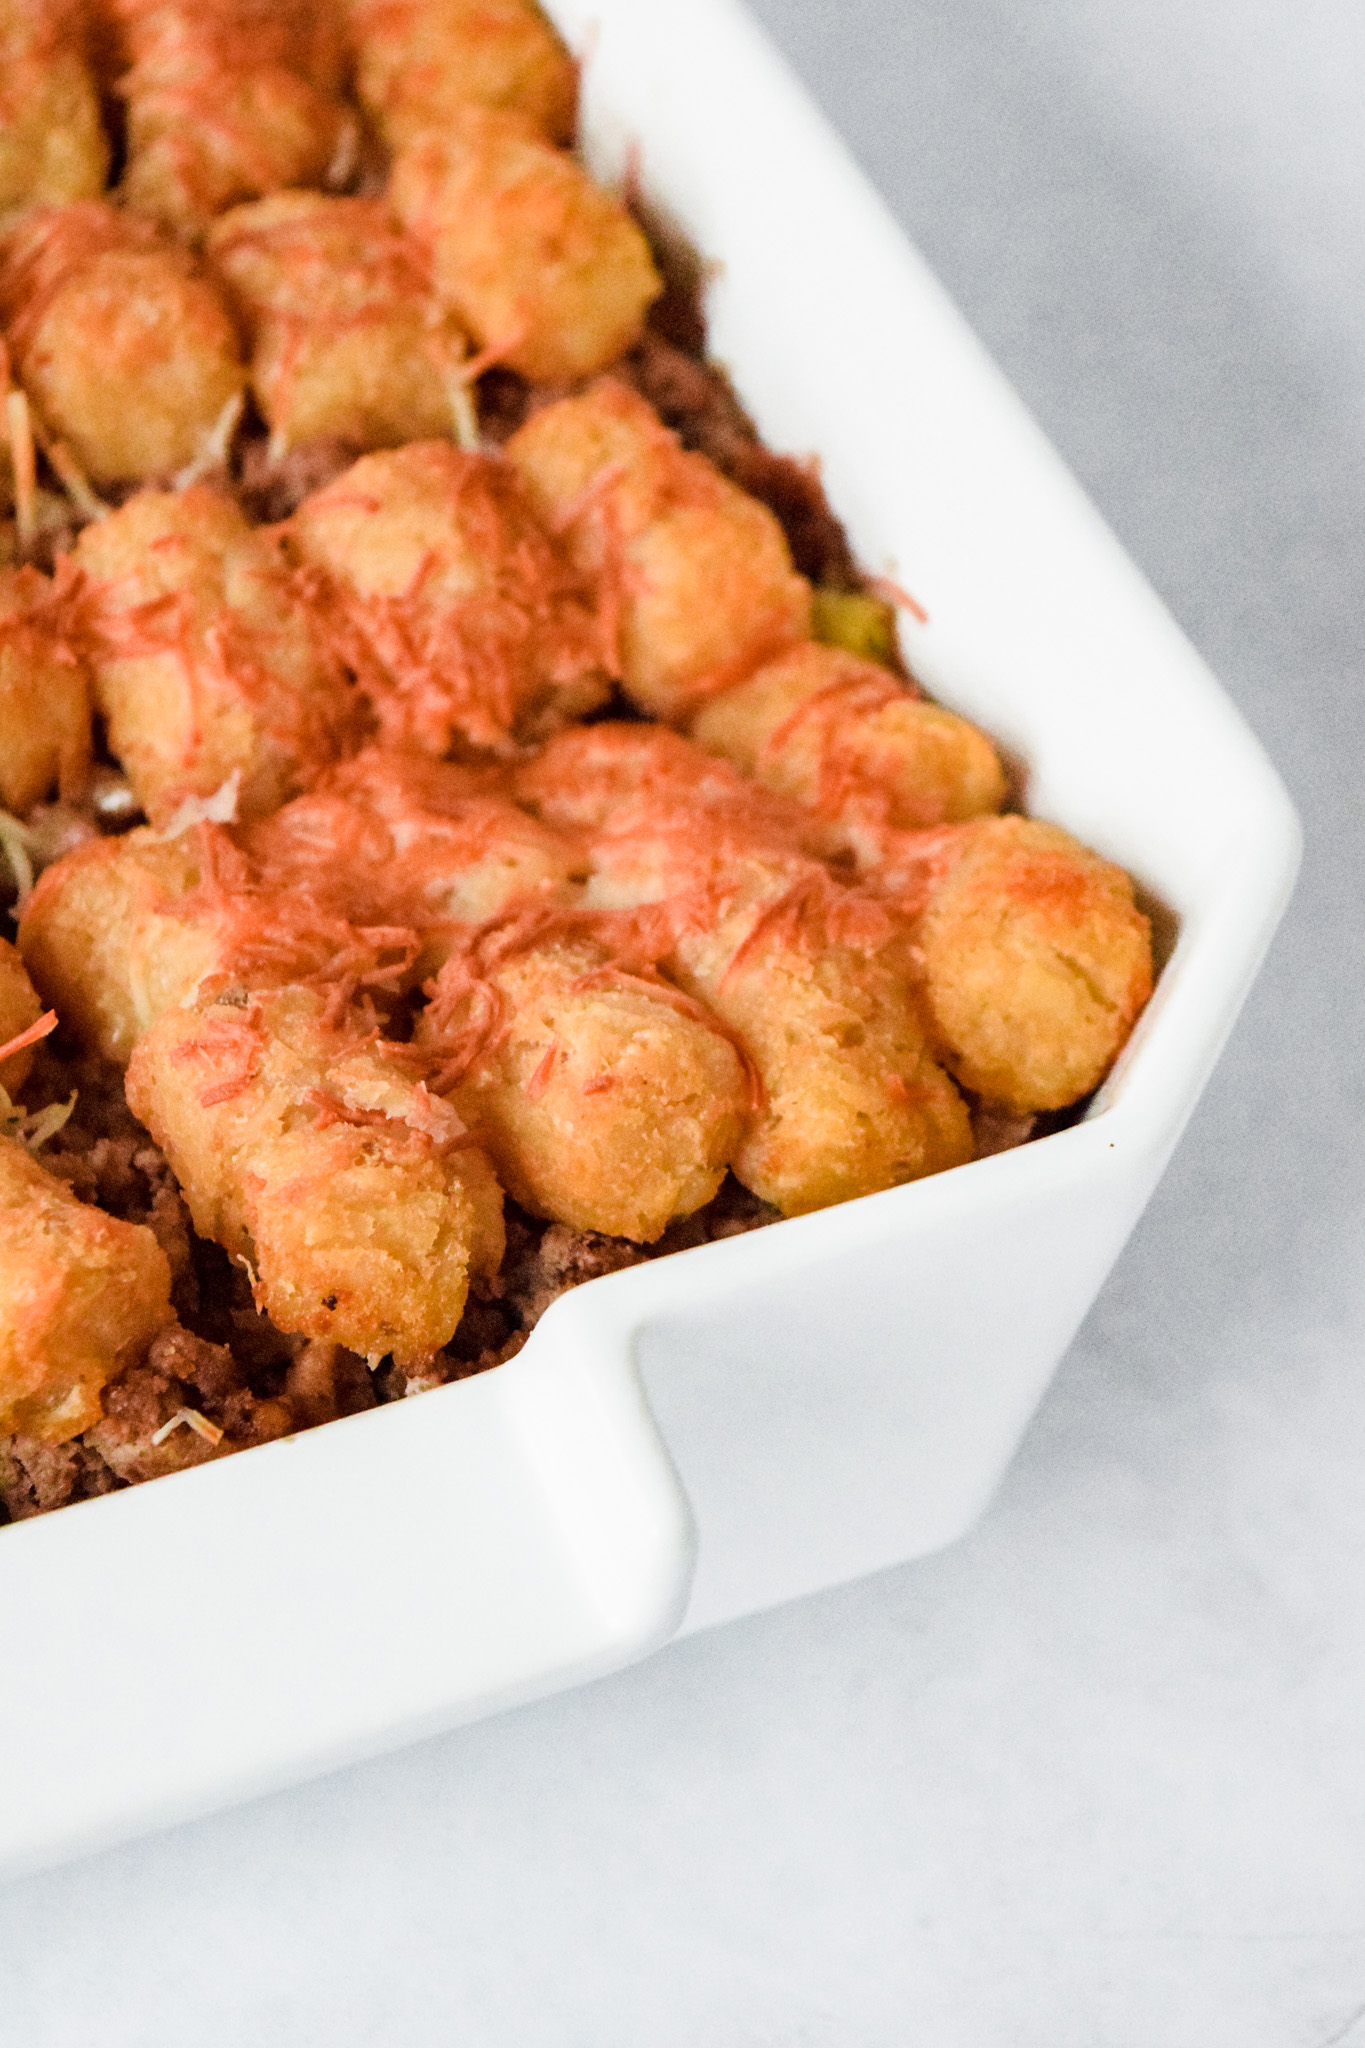 Baked Tater Tot Casserole with Ground Beef and Vegetables in a White Baking Dish